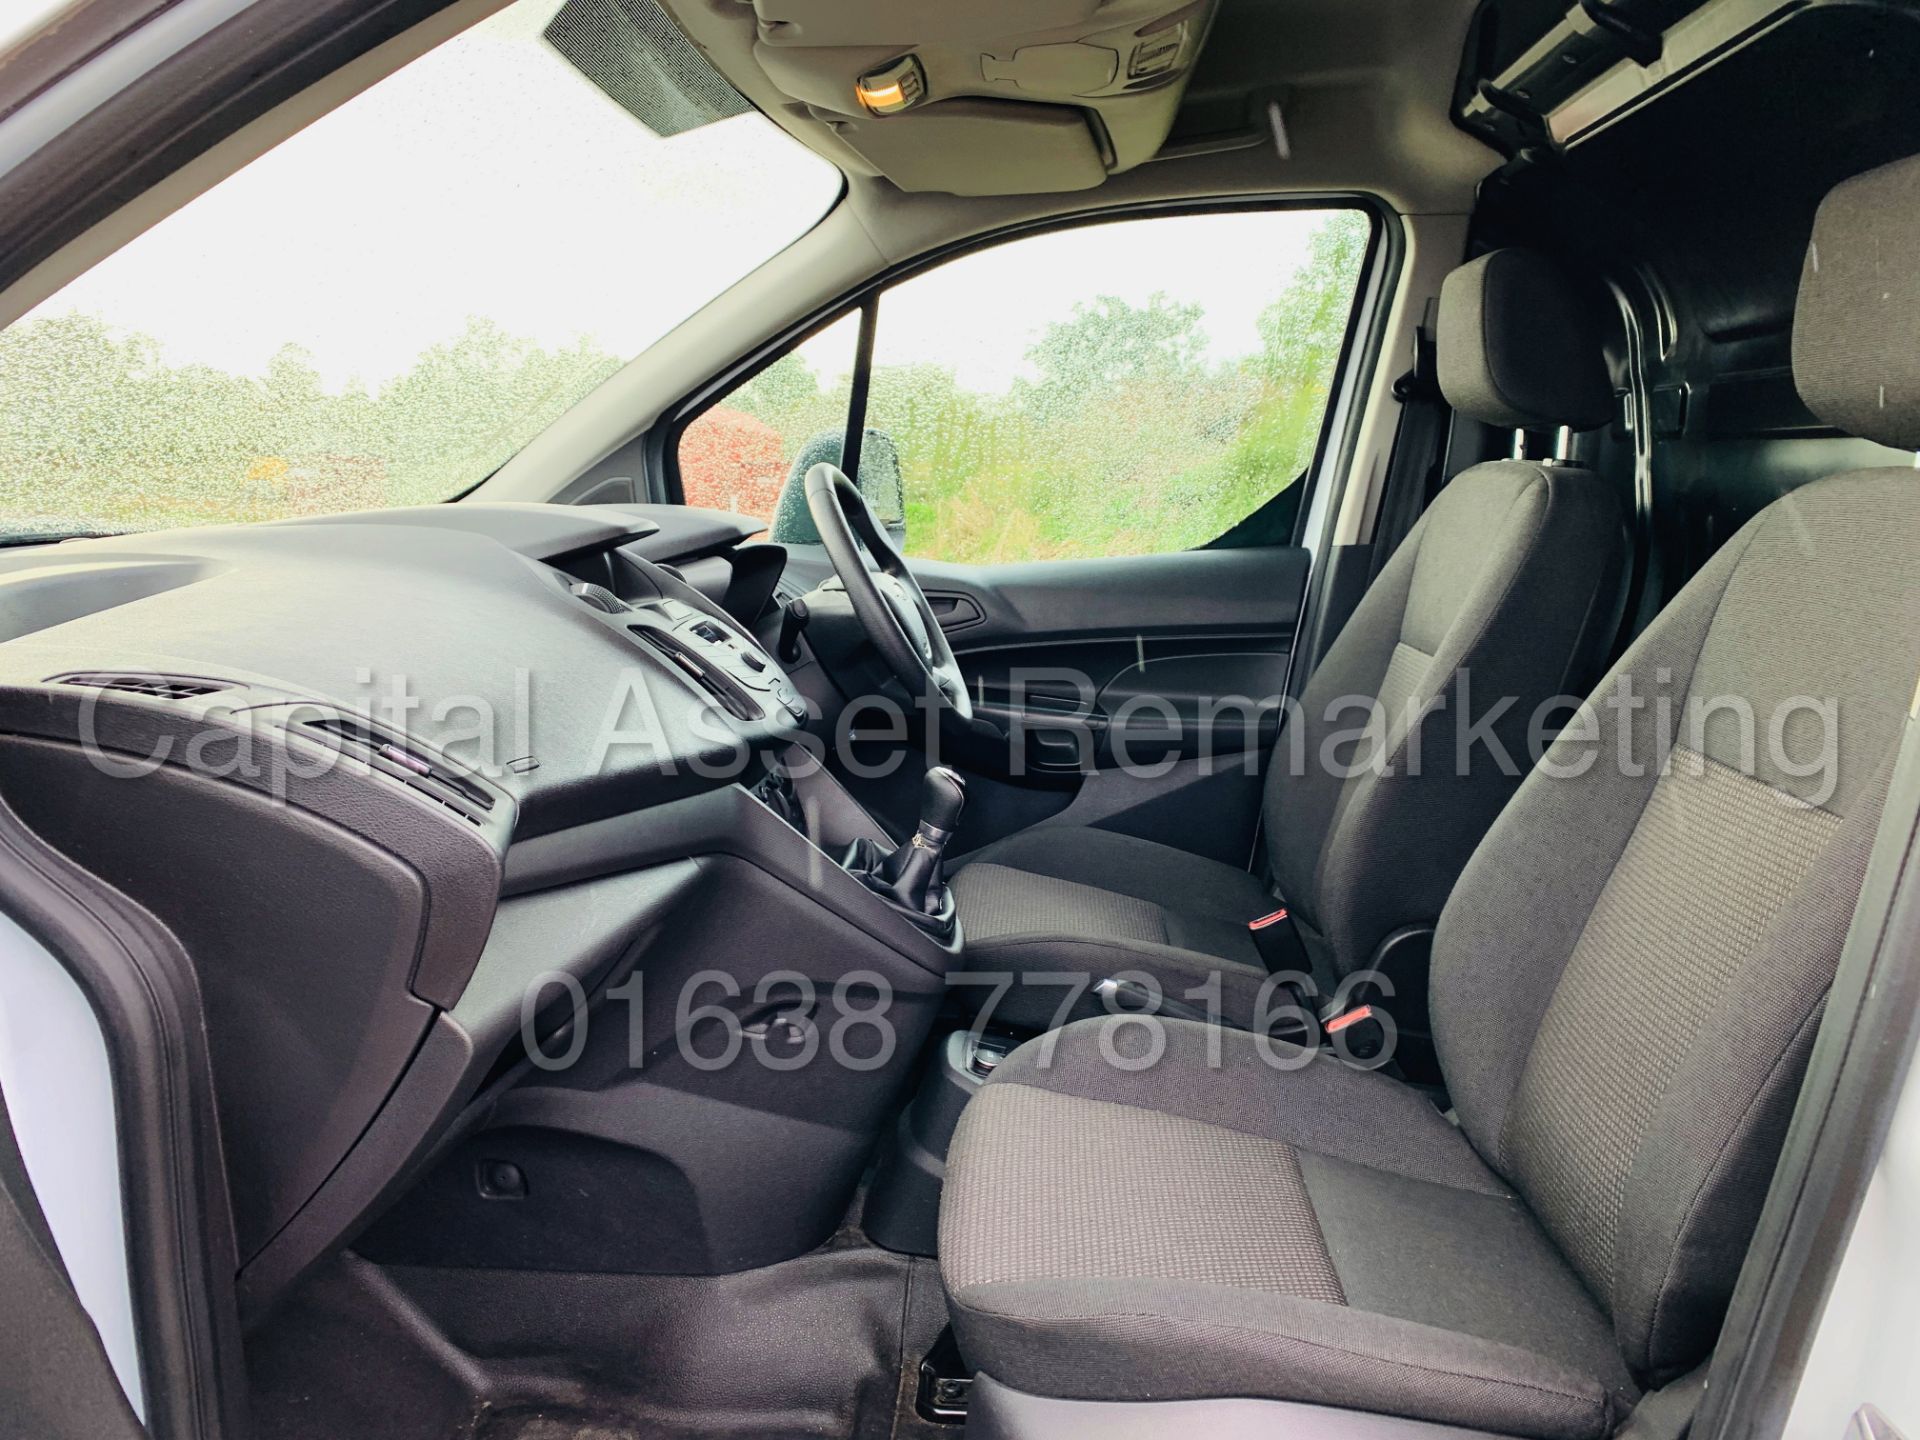 (On Sale) FORD TRANSIT CONNECT 75 T200 *SWB* (67 REG) '1.5 TDCI - EURO 6 COMPLIANT' (1 OWNER) - Image 19 of 36